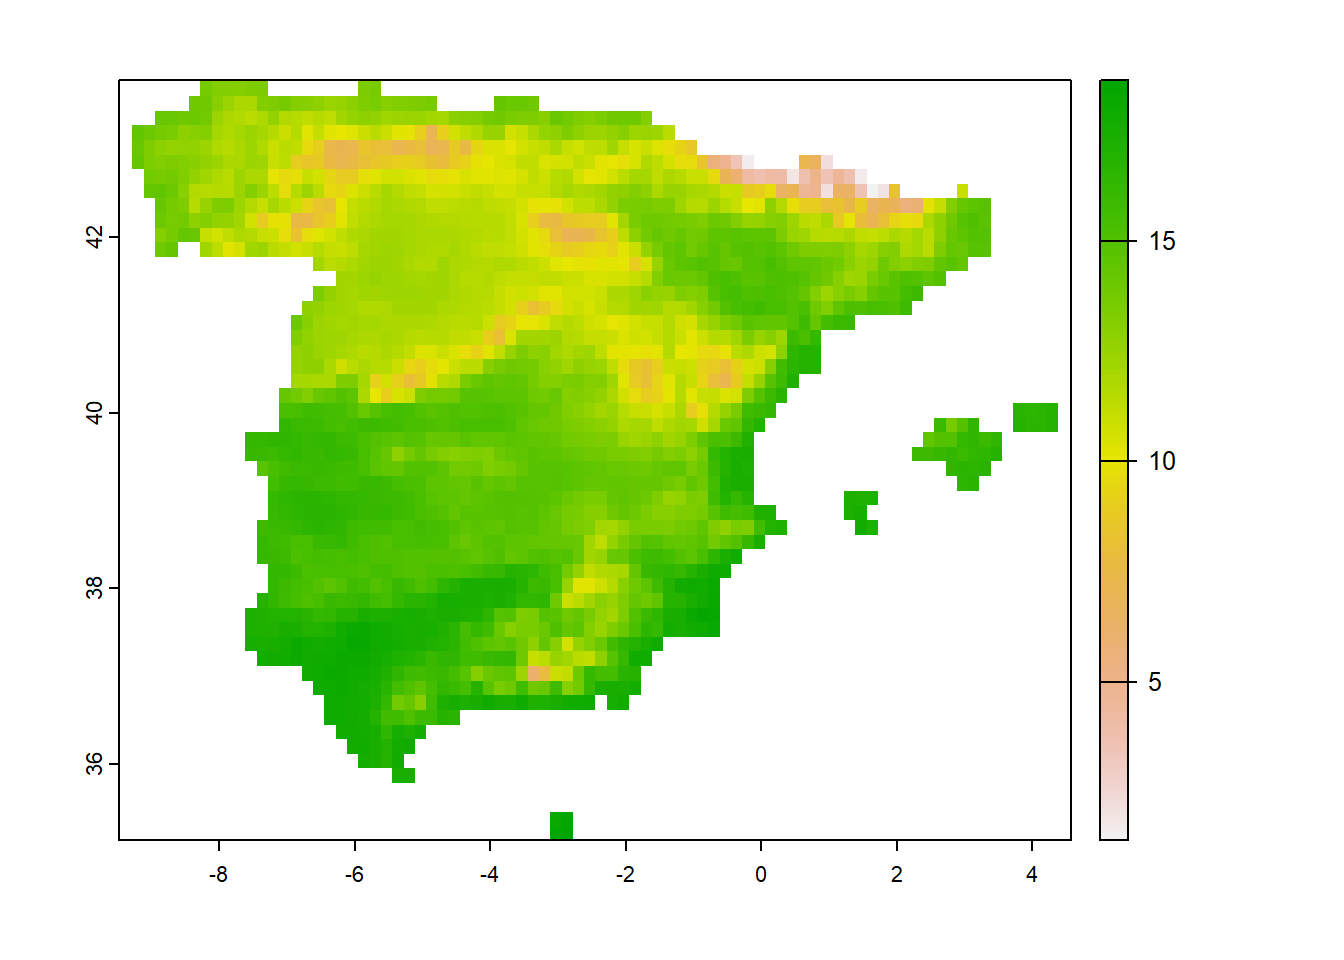 Low resolution raster representing the average annual temperature in Spain.